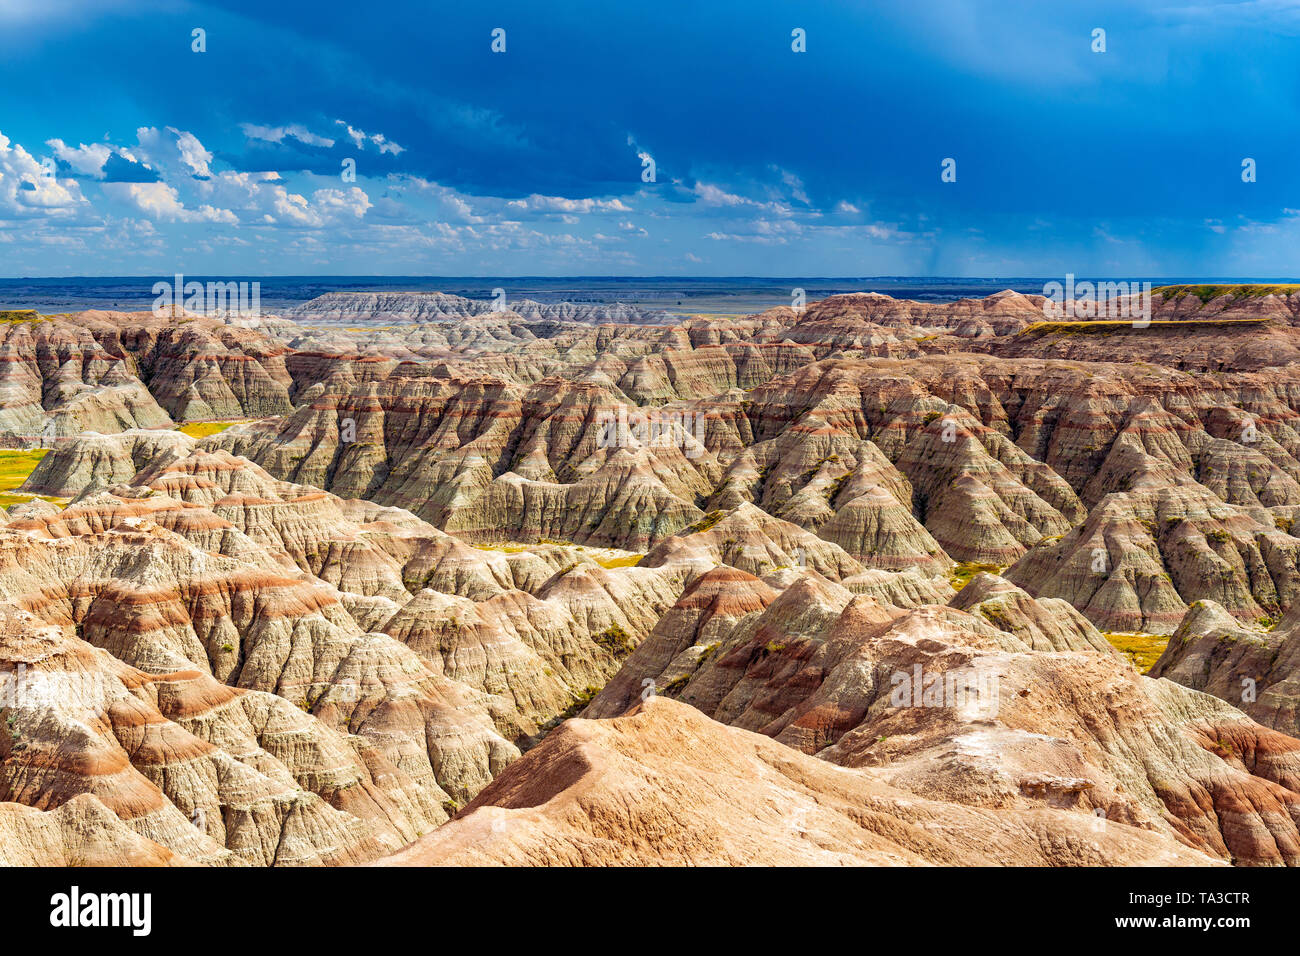 A thunderstorm inside Badlands national park with the rock formations illuminated by sunlight, Rapid City, South Dakota, USA. Stock Photo